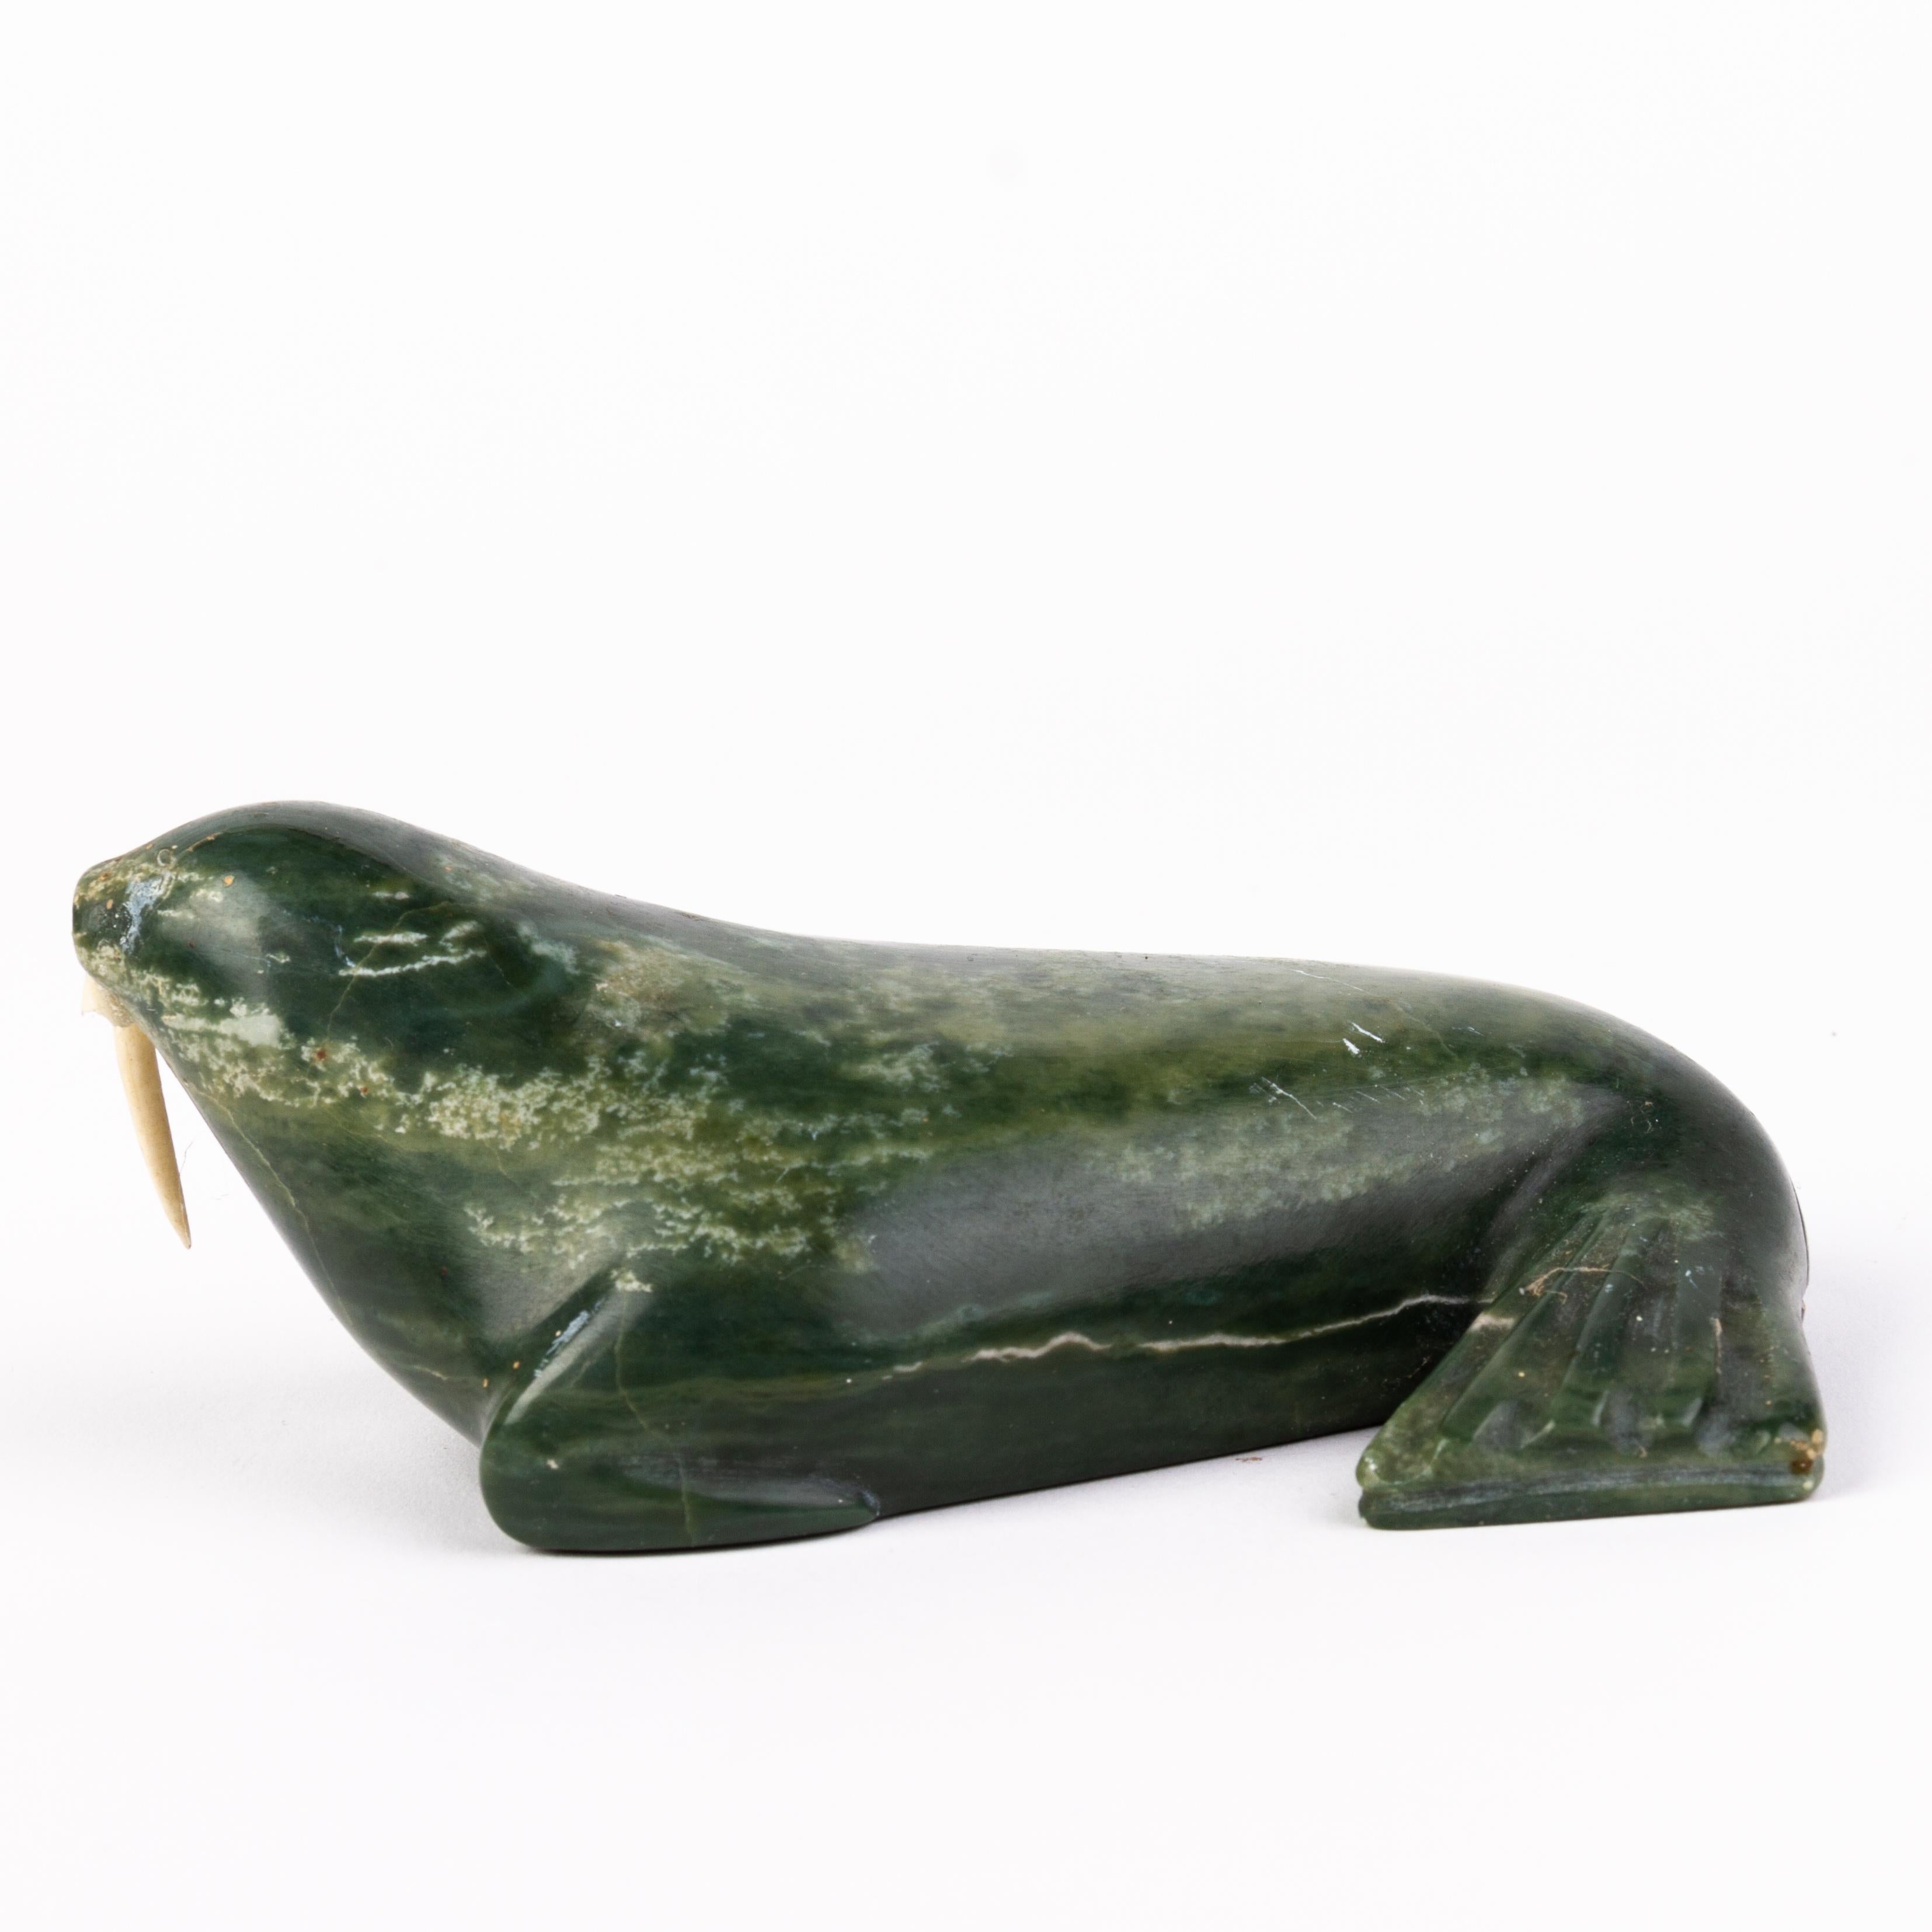 In good condition
From a private collection
Signed Inuit Seal Sculpture 